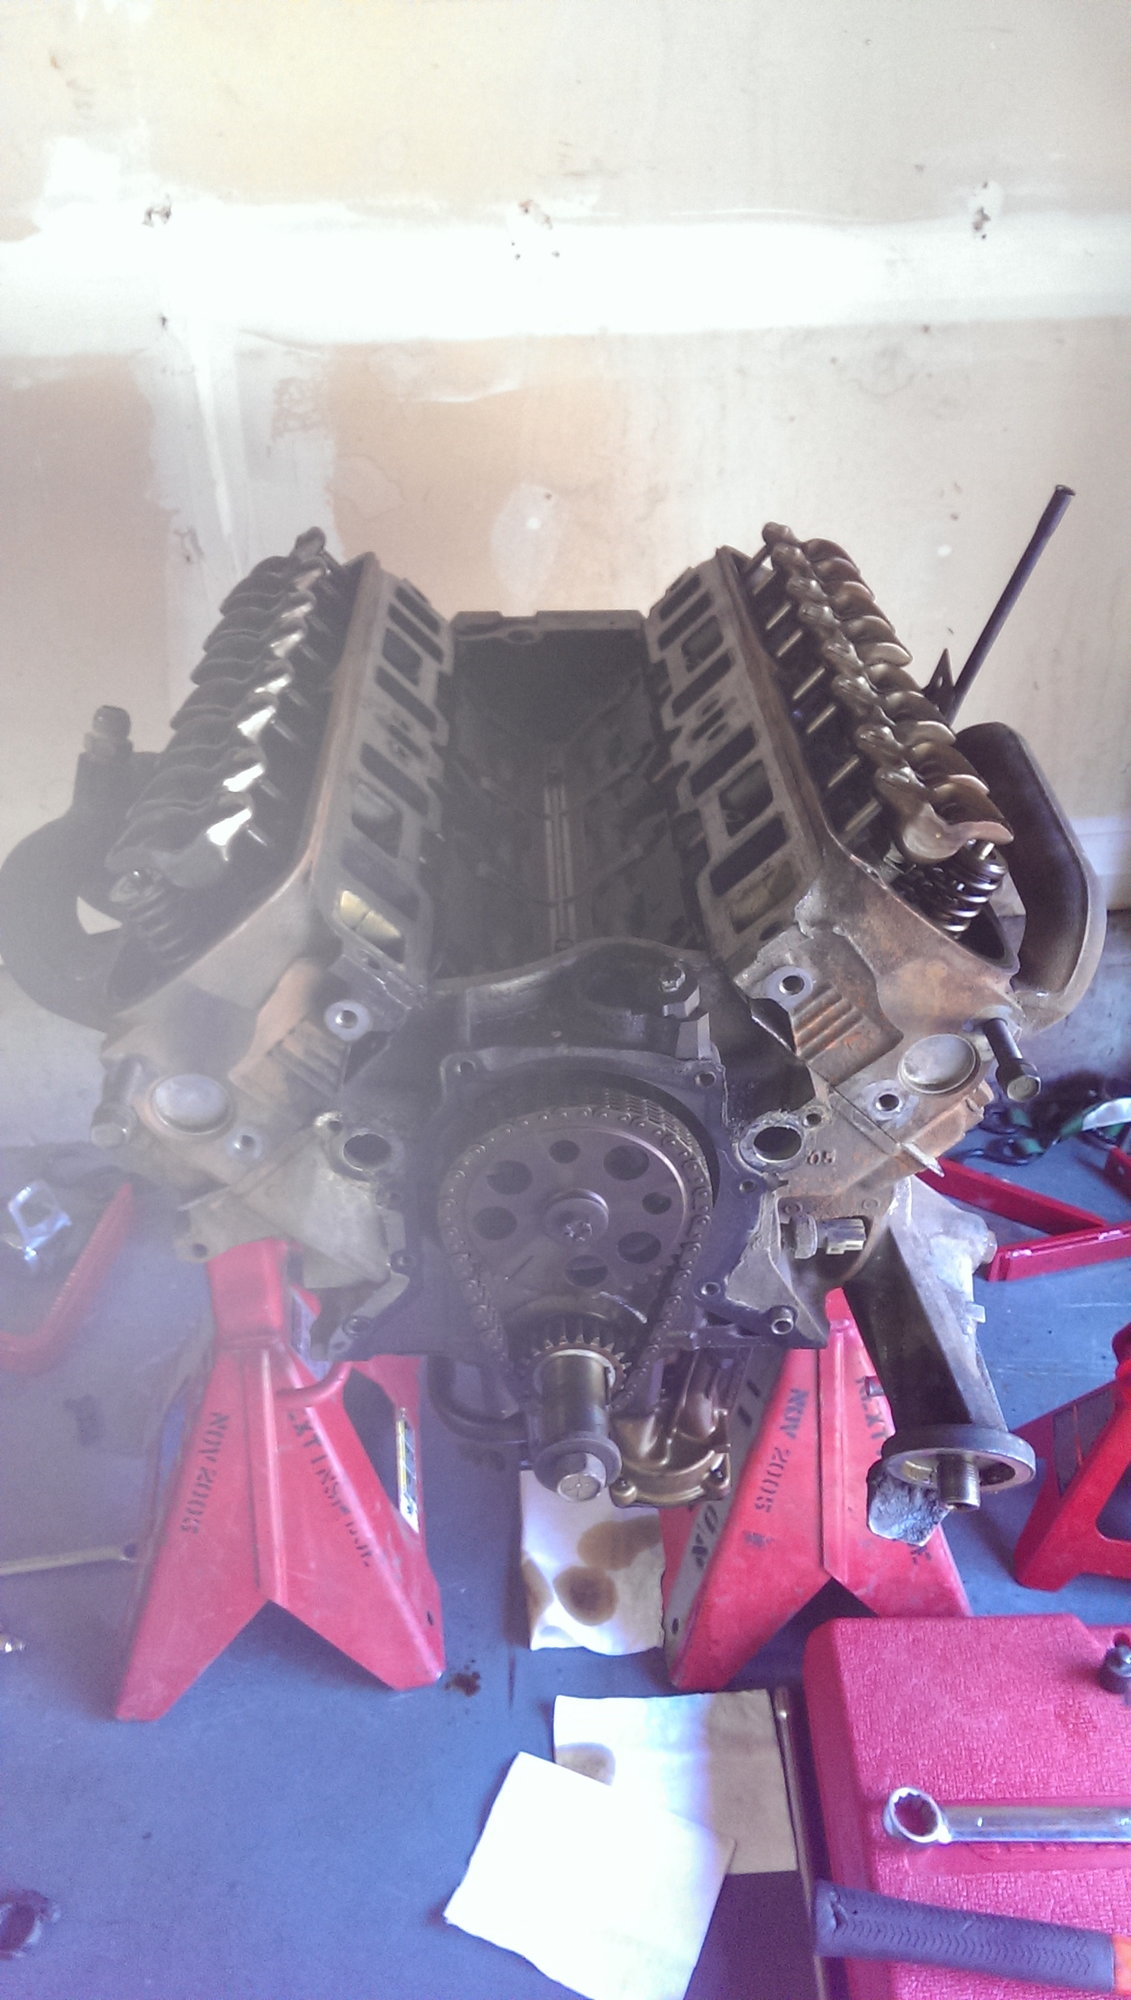 2000 Ford explorer engine swap help. - Ford Truck Enthusiasts Forums